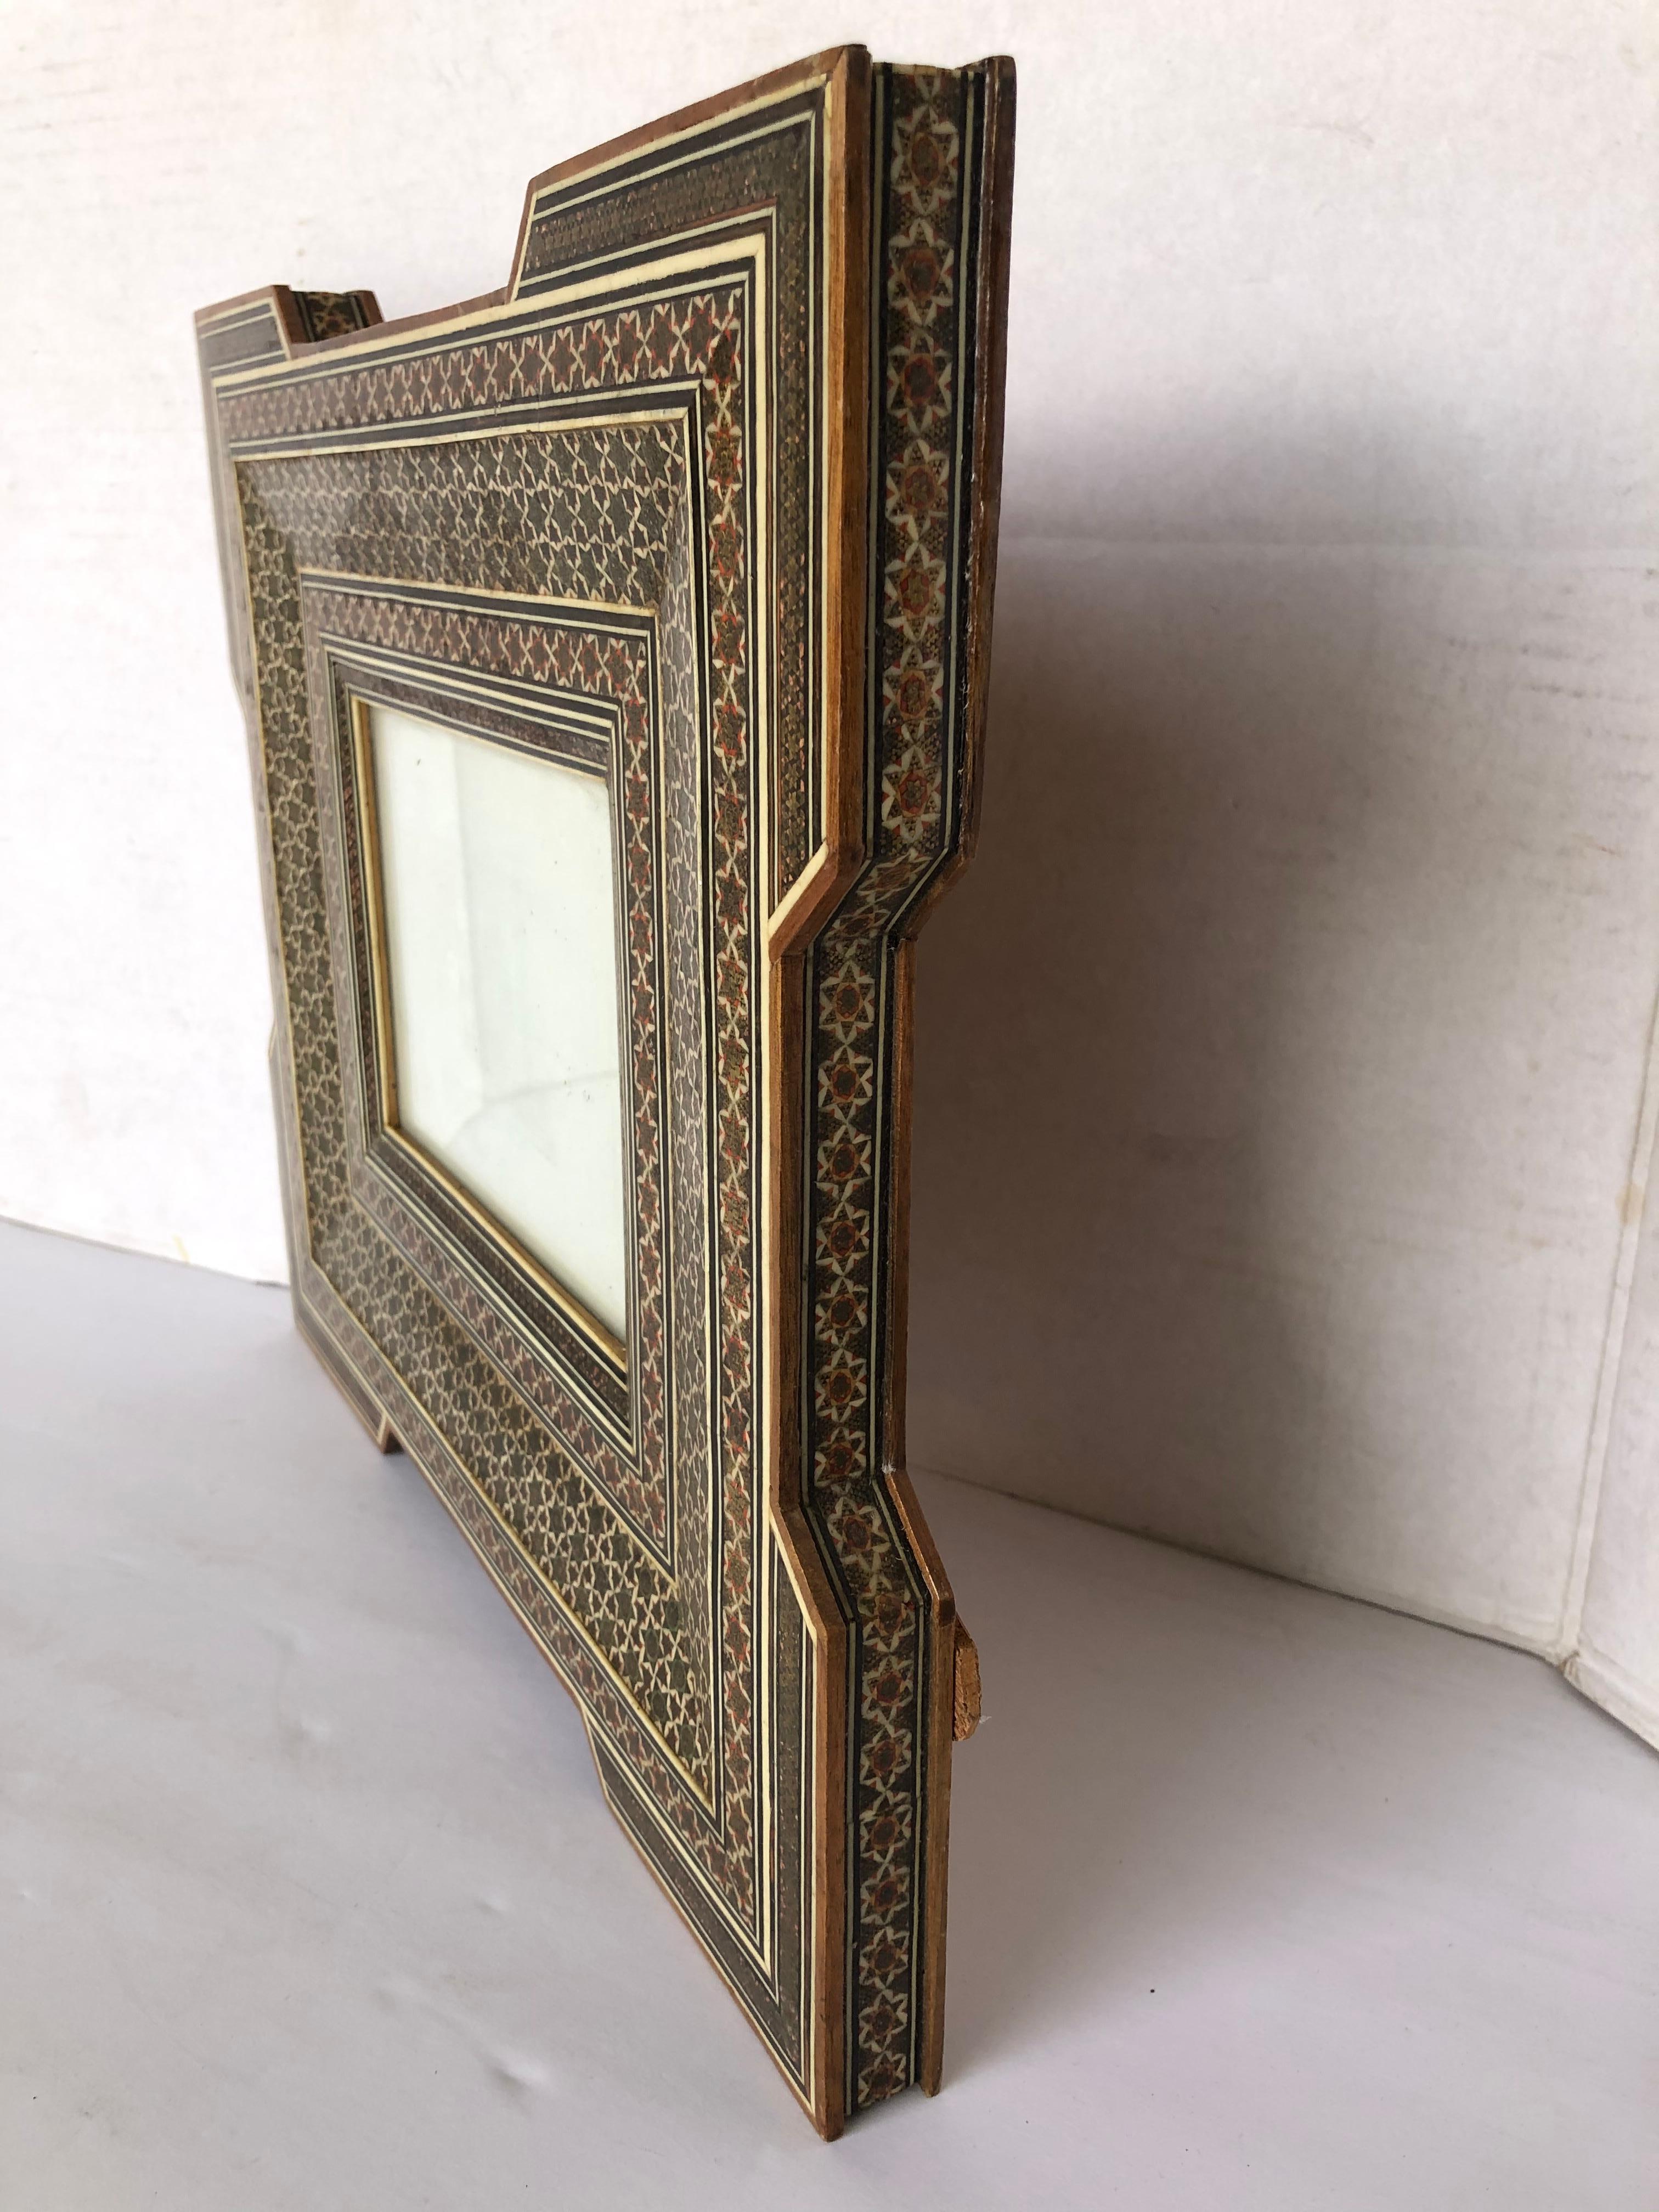 Antique Islamic woodwork picture frame possibly from the Middle East. This is a typical form of Islamic Art.
It is a museum-quality piece. This pretty antique picture frame is decorated with a repeated form of plants motifs and geometric shapes. In